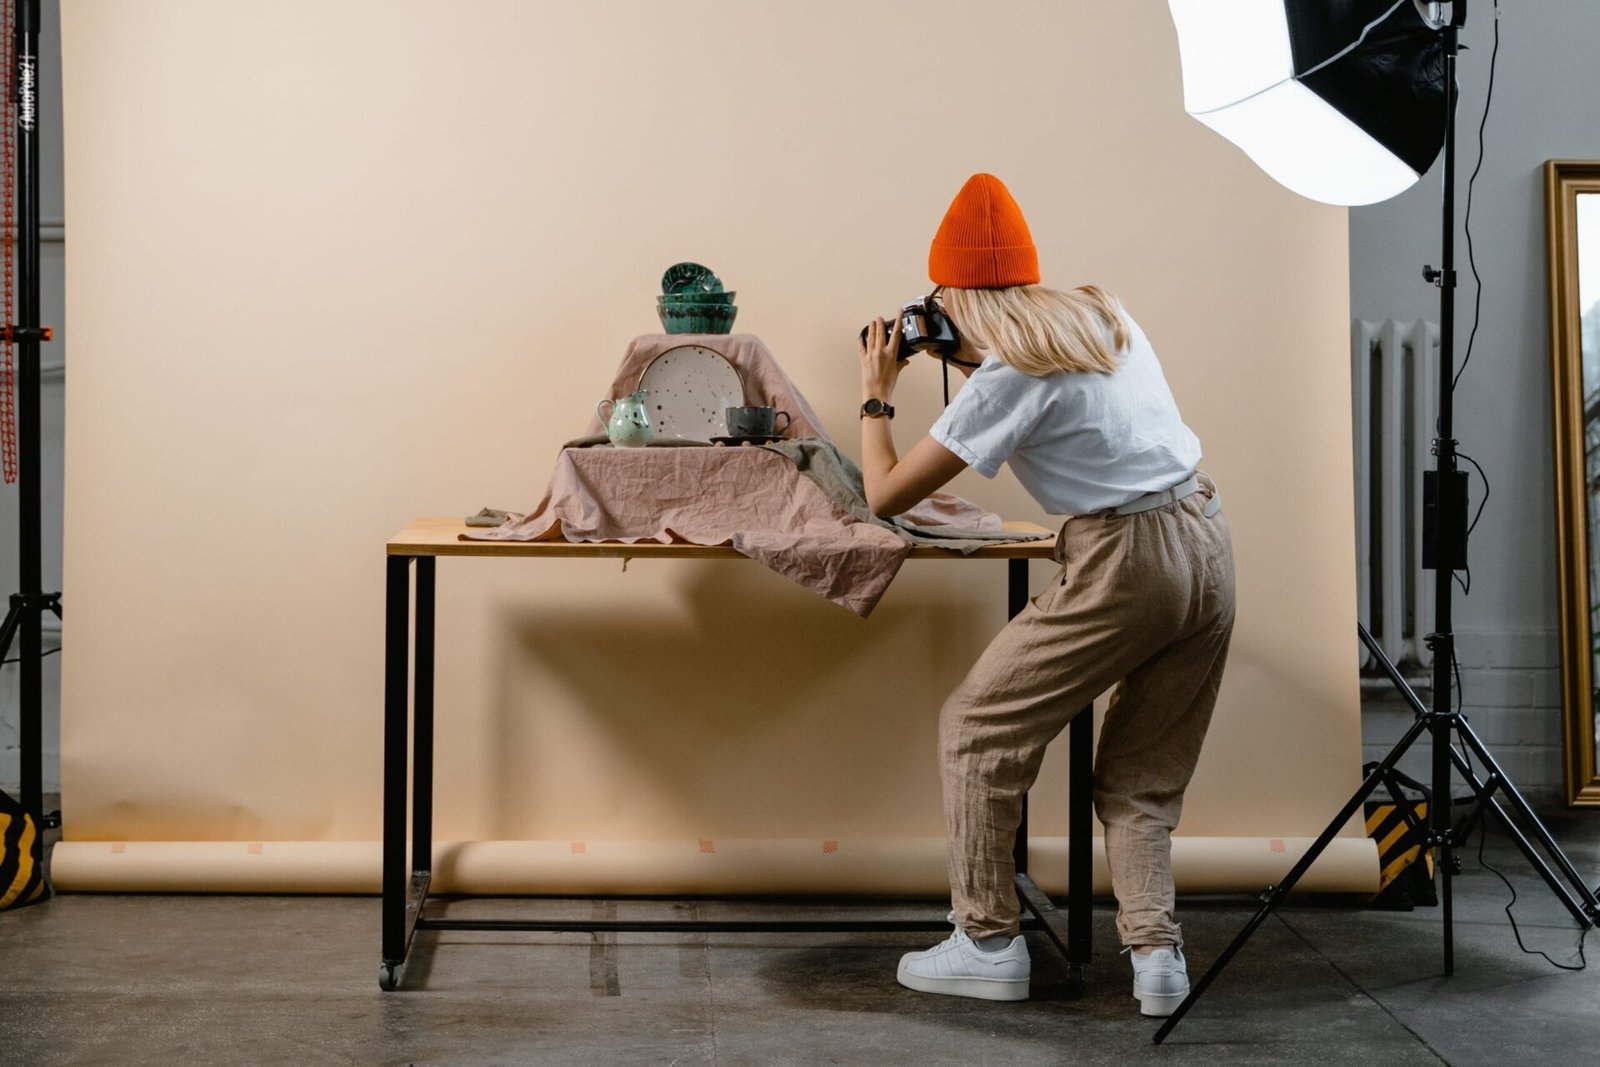 Product Photoshoot Tips To Elevate Your Amazon Photos